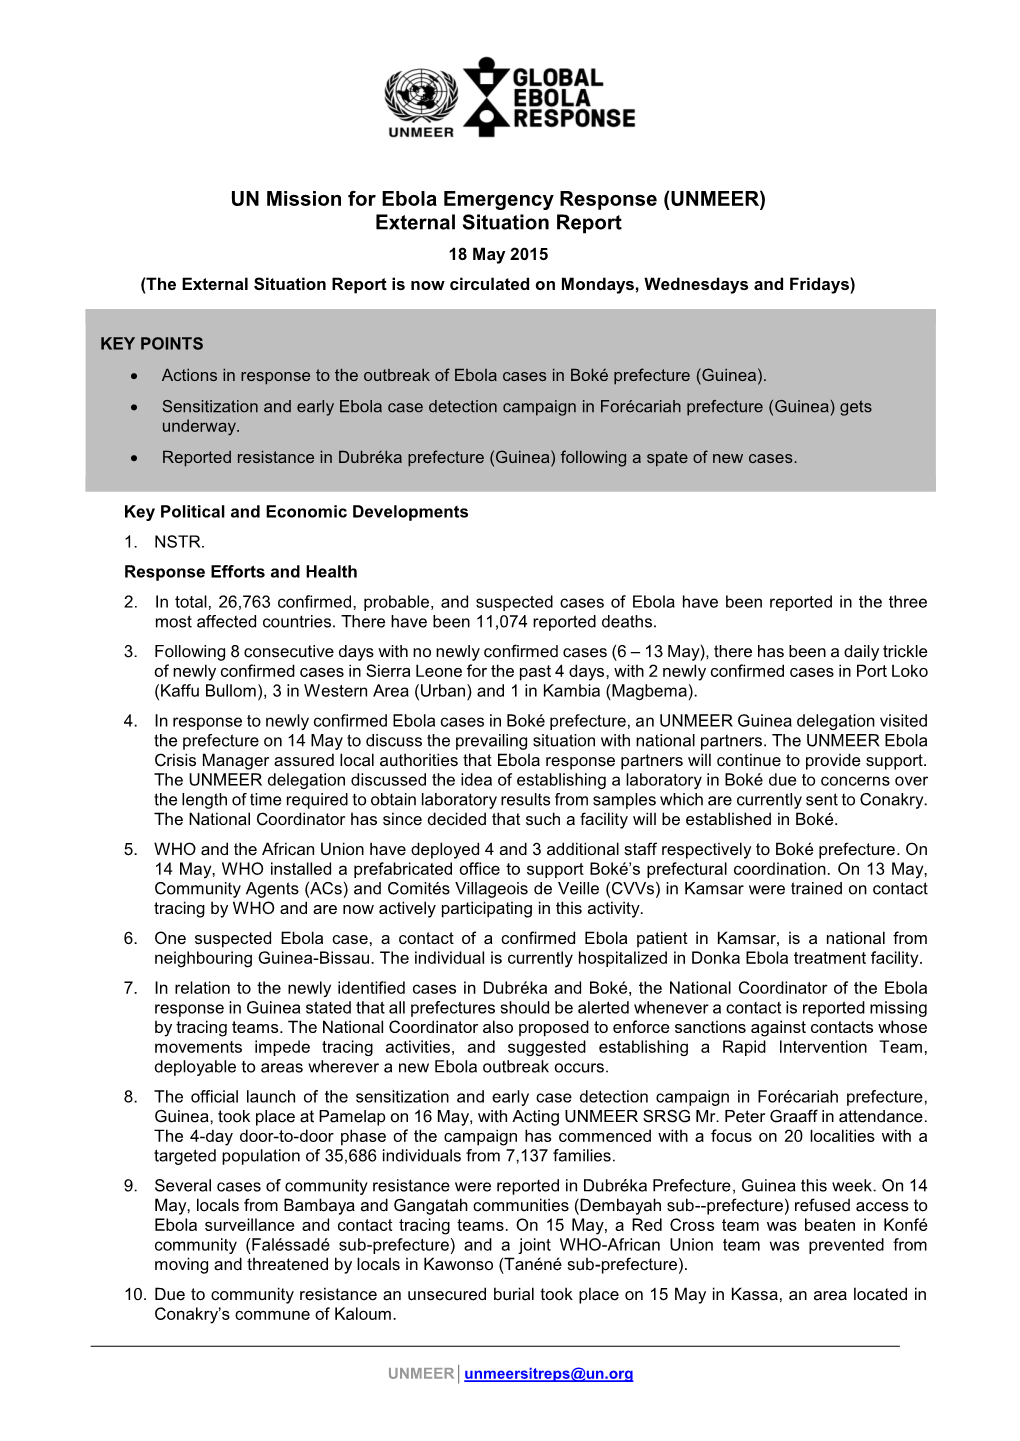 UNMEER) External Situation Report 18 May 2015 (The External Situation Report Is Now Circulated on Mondays, Wednesdays and Fridays